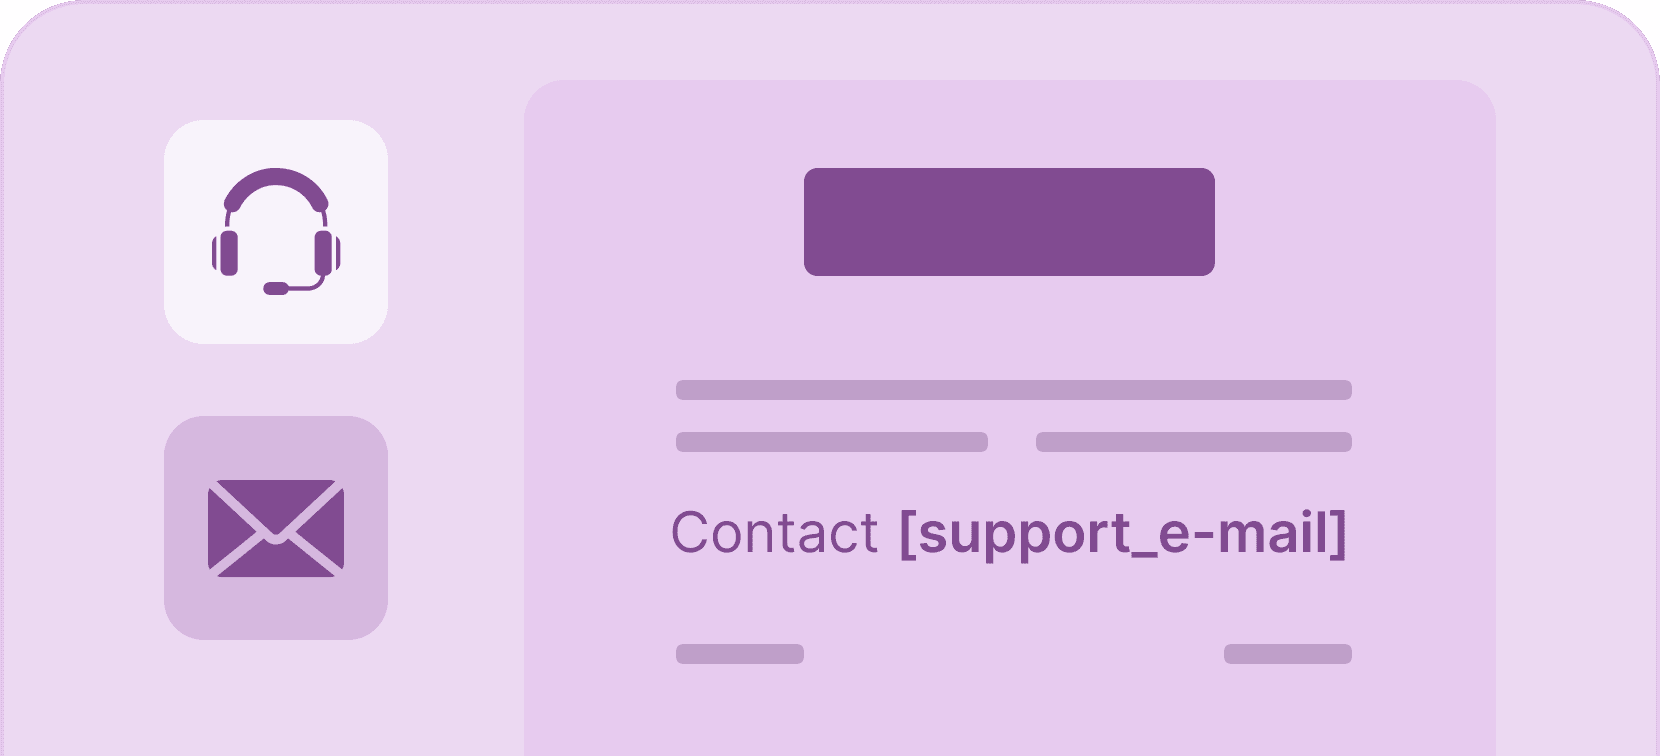 Add email for customer support - Certifier features